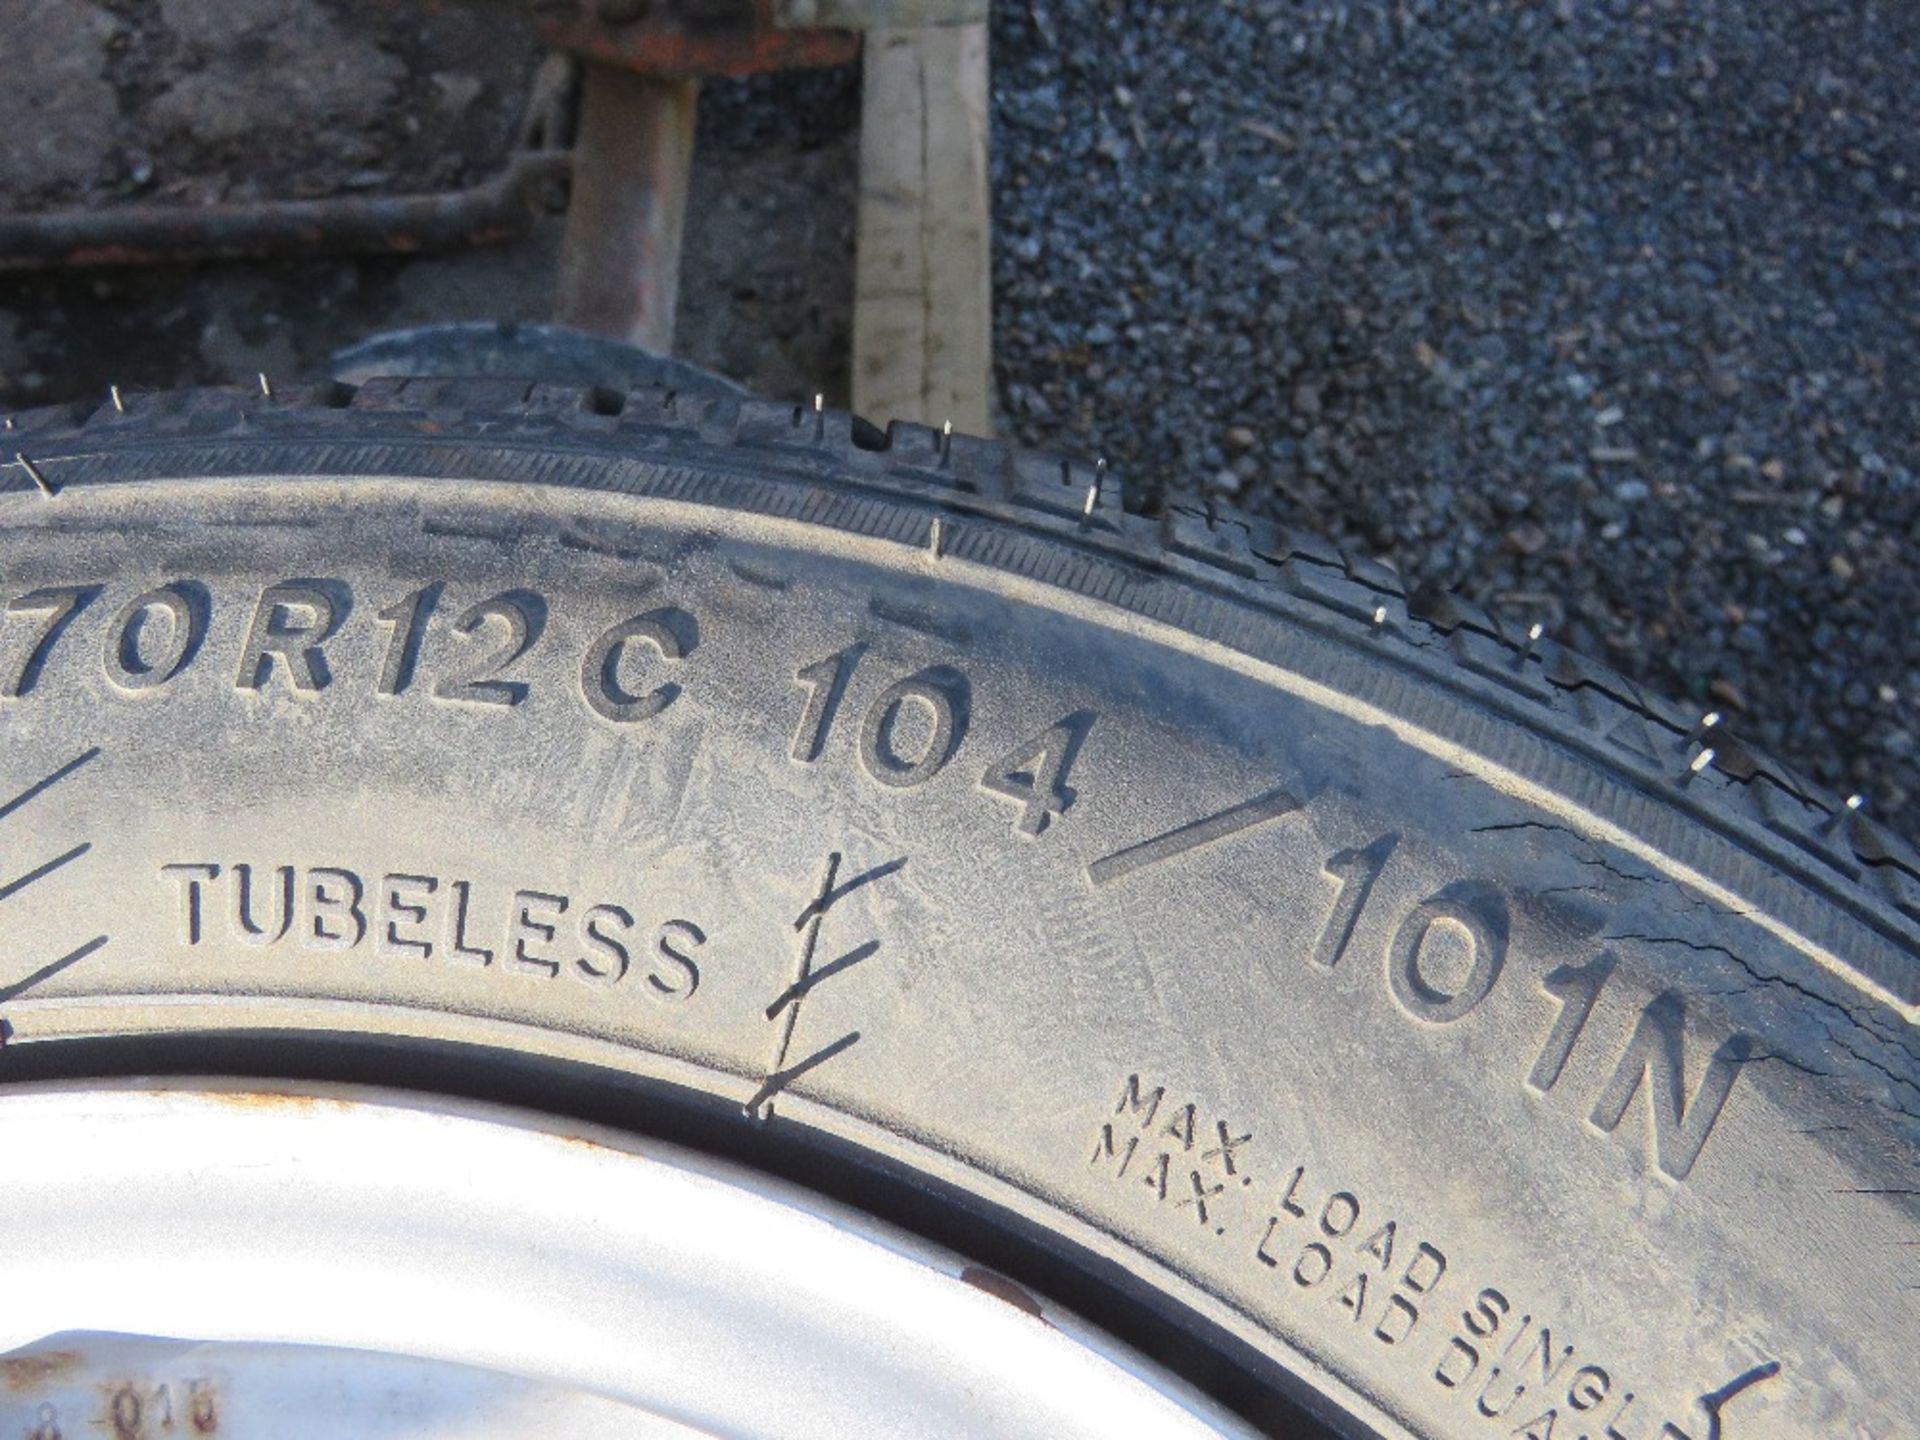 4 X TRAILER WHEELS AND TYRES. 155-70R12C104 SIZE. - Image 4 of 4